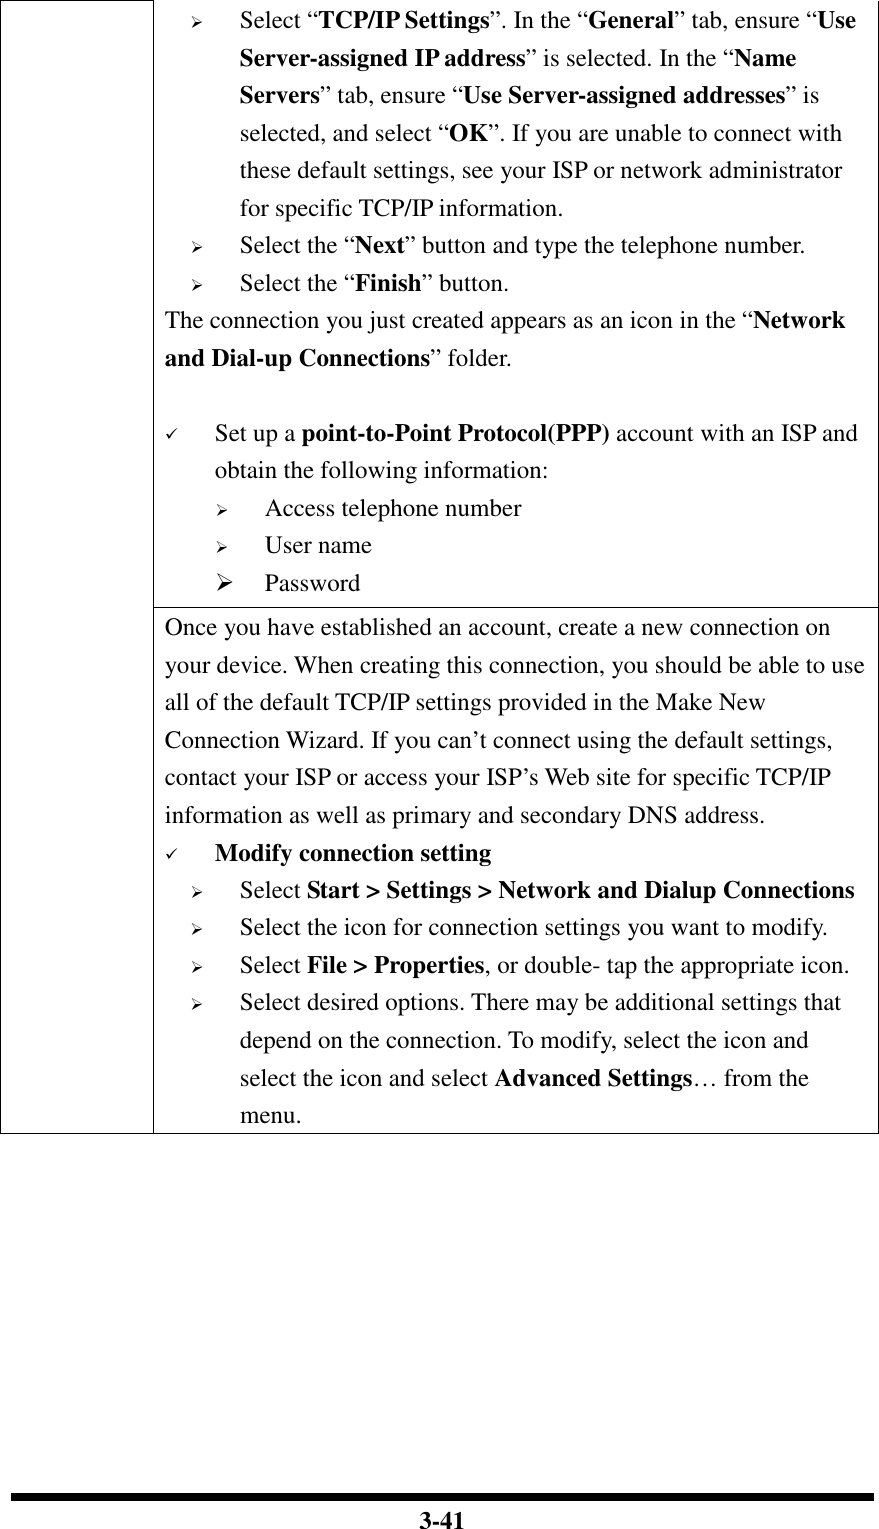  3-41  Select “TCP/IP Settings”. In the “General” tab, ensure “Use Server-assigned IP address” is selected. In the “Name Servers” tab, ensure “Use Server-assigned addresses” is selected, and select “OK”. If you are unable to connect with these default settings, see your ISP or network administrator for specific TCP/IP information.  Select the “Next” button and type the telephone number.  Select the “Finish” button. The connection you just created appears as an icon in the “Network and Dial-up Connections” folder.       Set up a point-to-Point Protocol(PPP) account with an ISP and obtain the following information:  Access telephone number  User name  Password Once you have established an account, create a new connection on your device. When creating this connection, you should be able to use all of the default TCP/IP settings provided in the Make New Connection Wizard. If you can’t connect using the default settings, contact your ISP or access your ISP’s Web site for specific TCP/IP information as well as primary and secondary DNS address.  Modify connection setting  Select Start &gt; Settings &gt; Network and Dialup Connections  Select the icon for connection settings you want to modify.  Select File &gt; Properties, or double- tap the appropriate icon.  Select desired options. There may be additional settings that depend on the connection. To modify, select the icon and select the icon and select Advanced Settings… from the menu.  